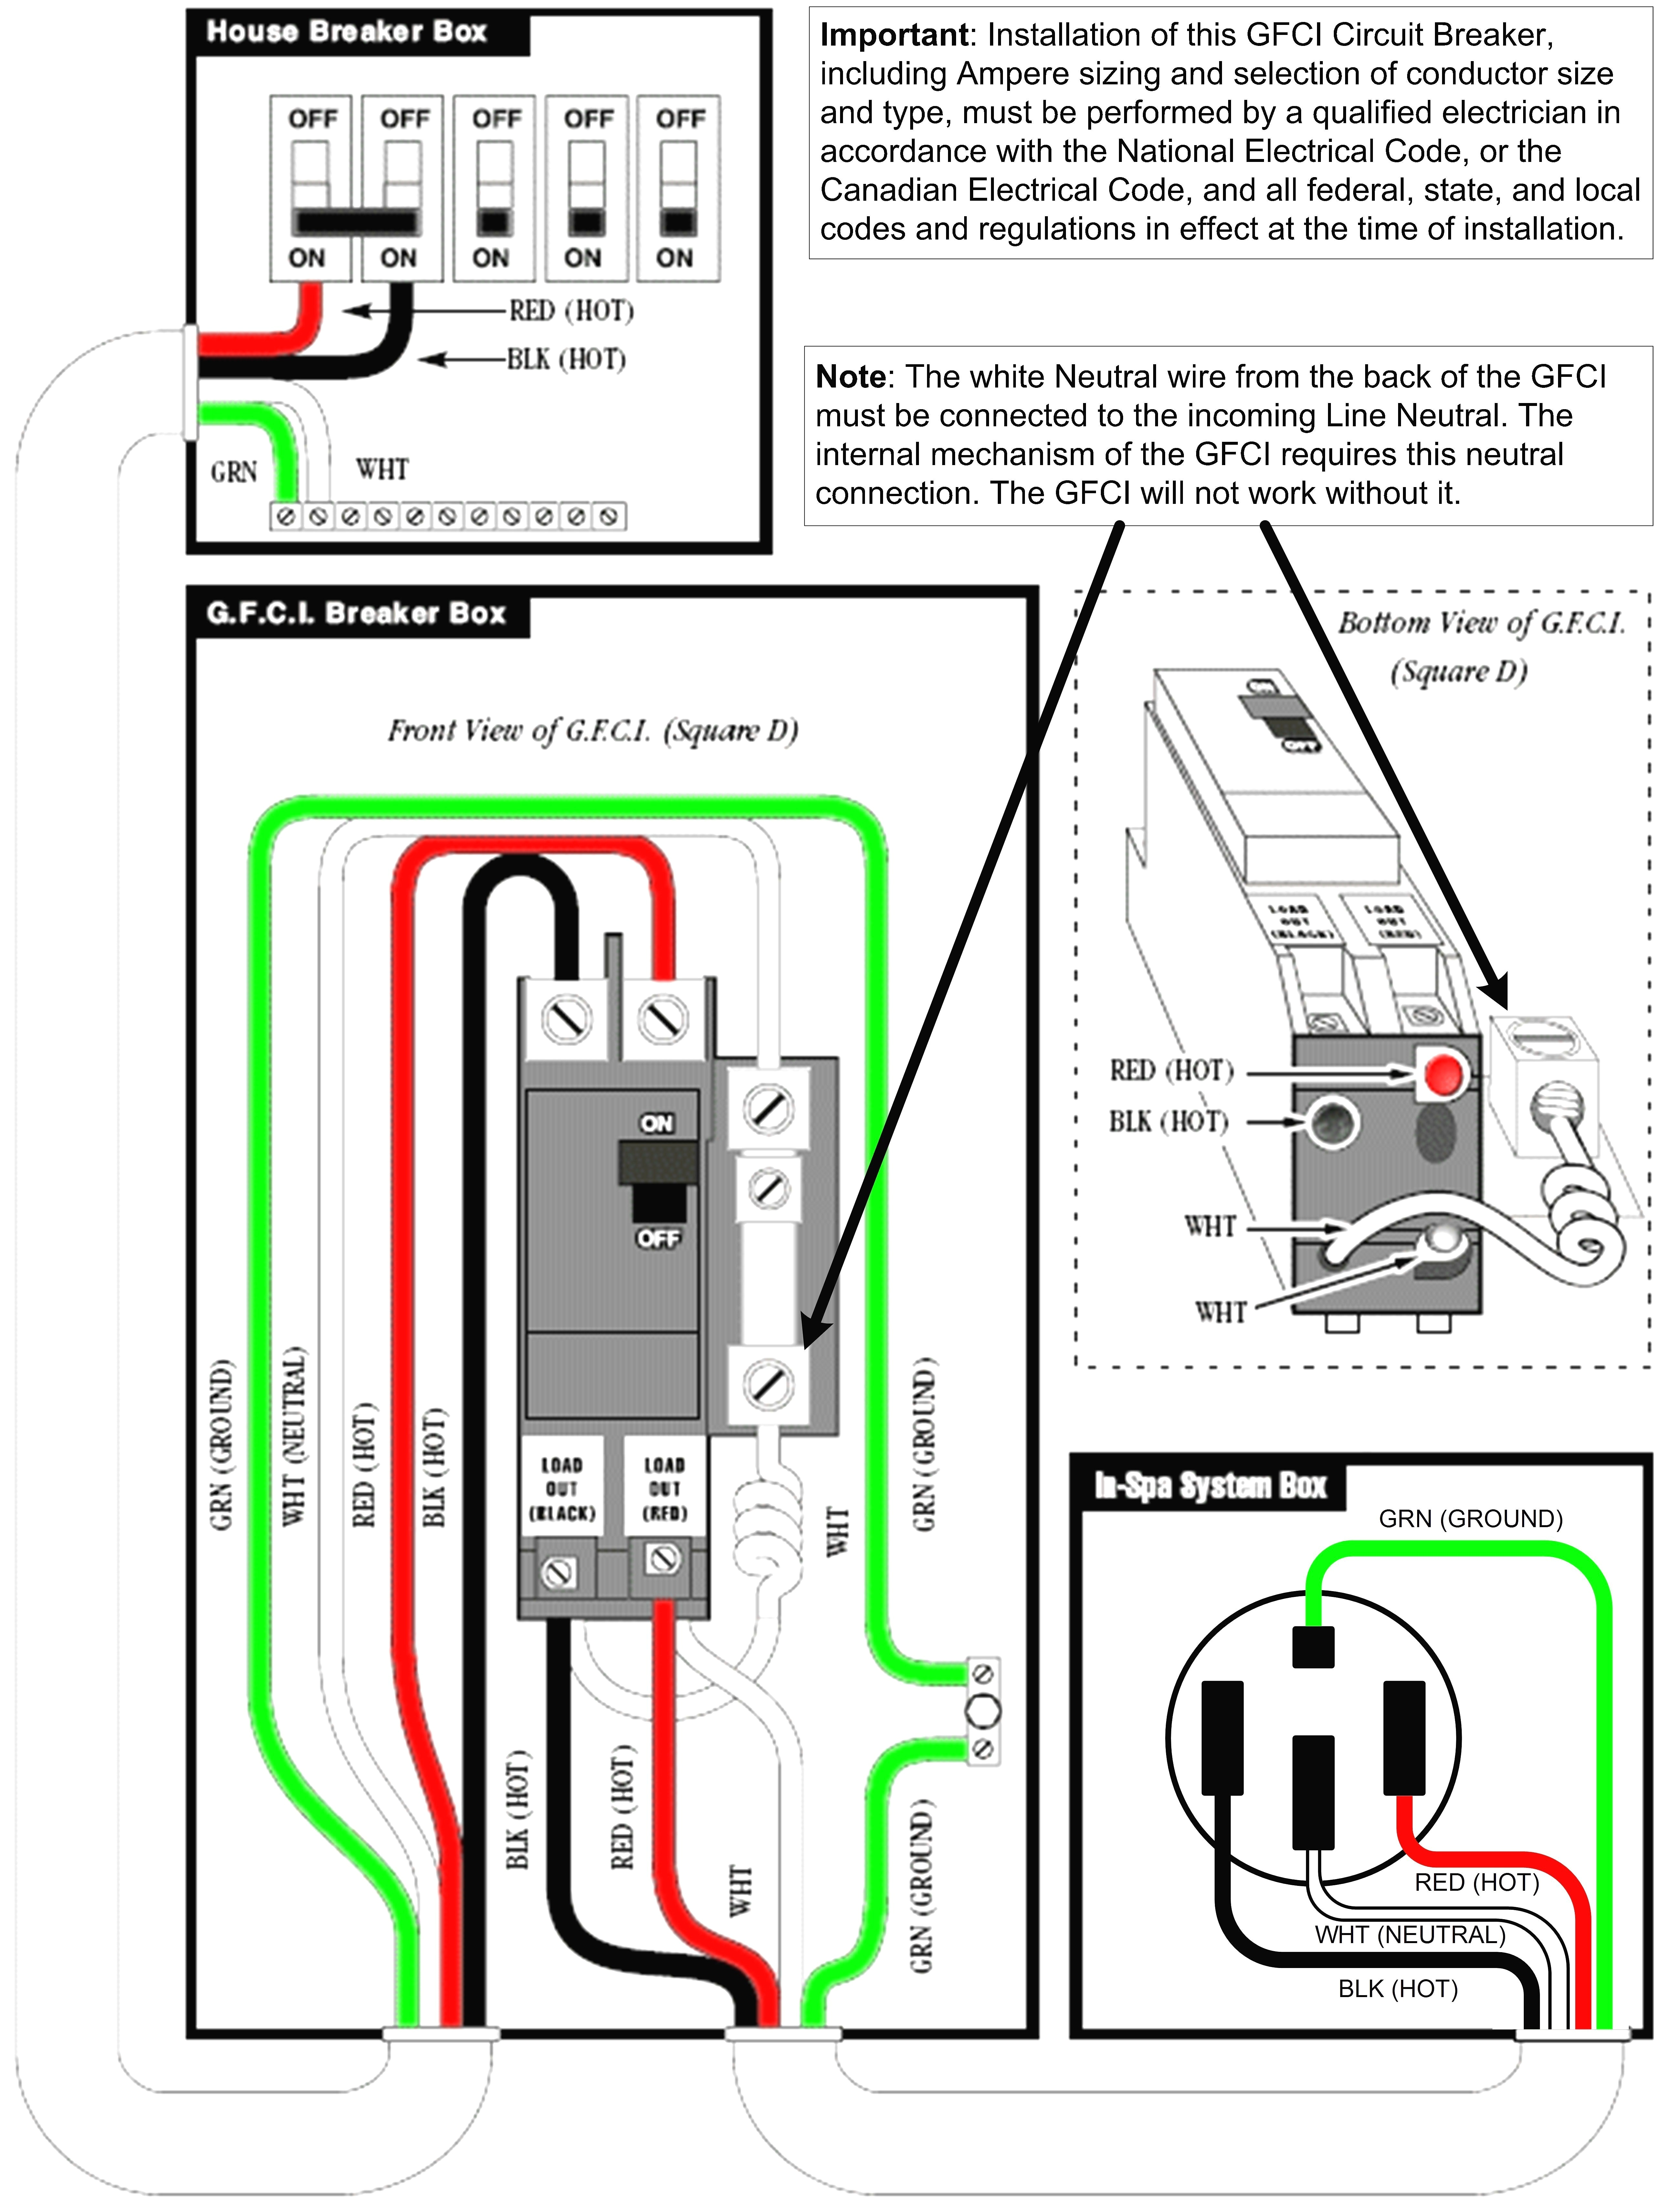 240v 3 wire diagrams wiring diagram namewiring diagram likewise 3 prong dryer outlet wiring on 240v